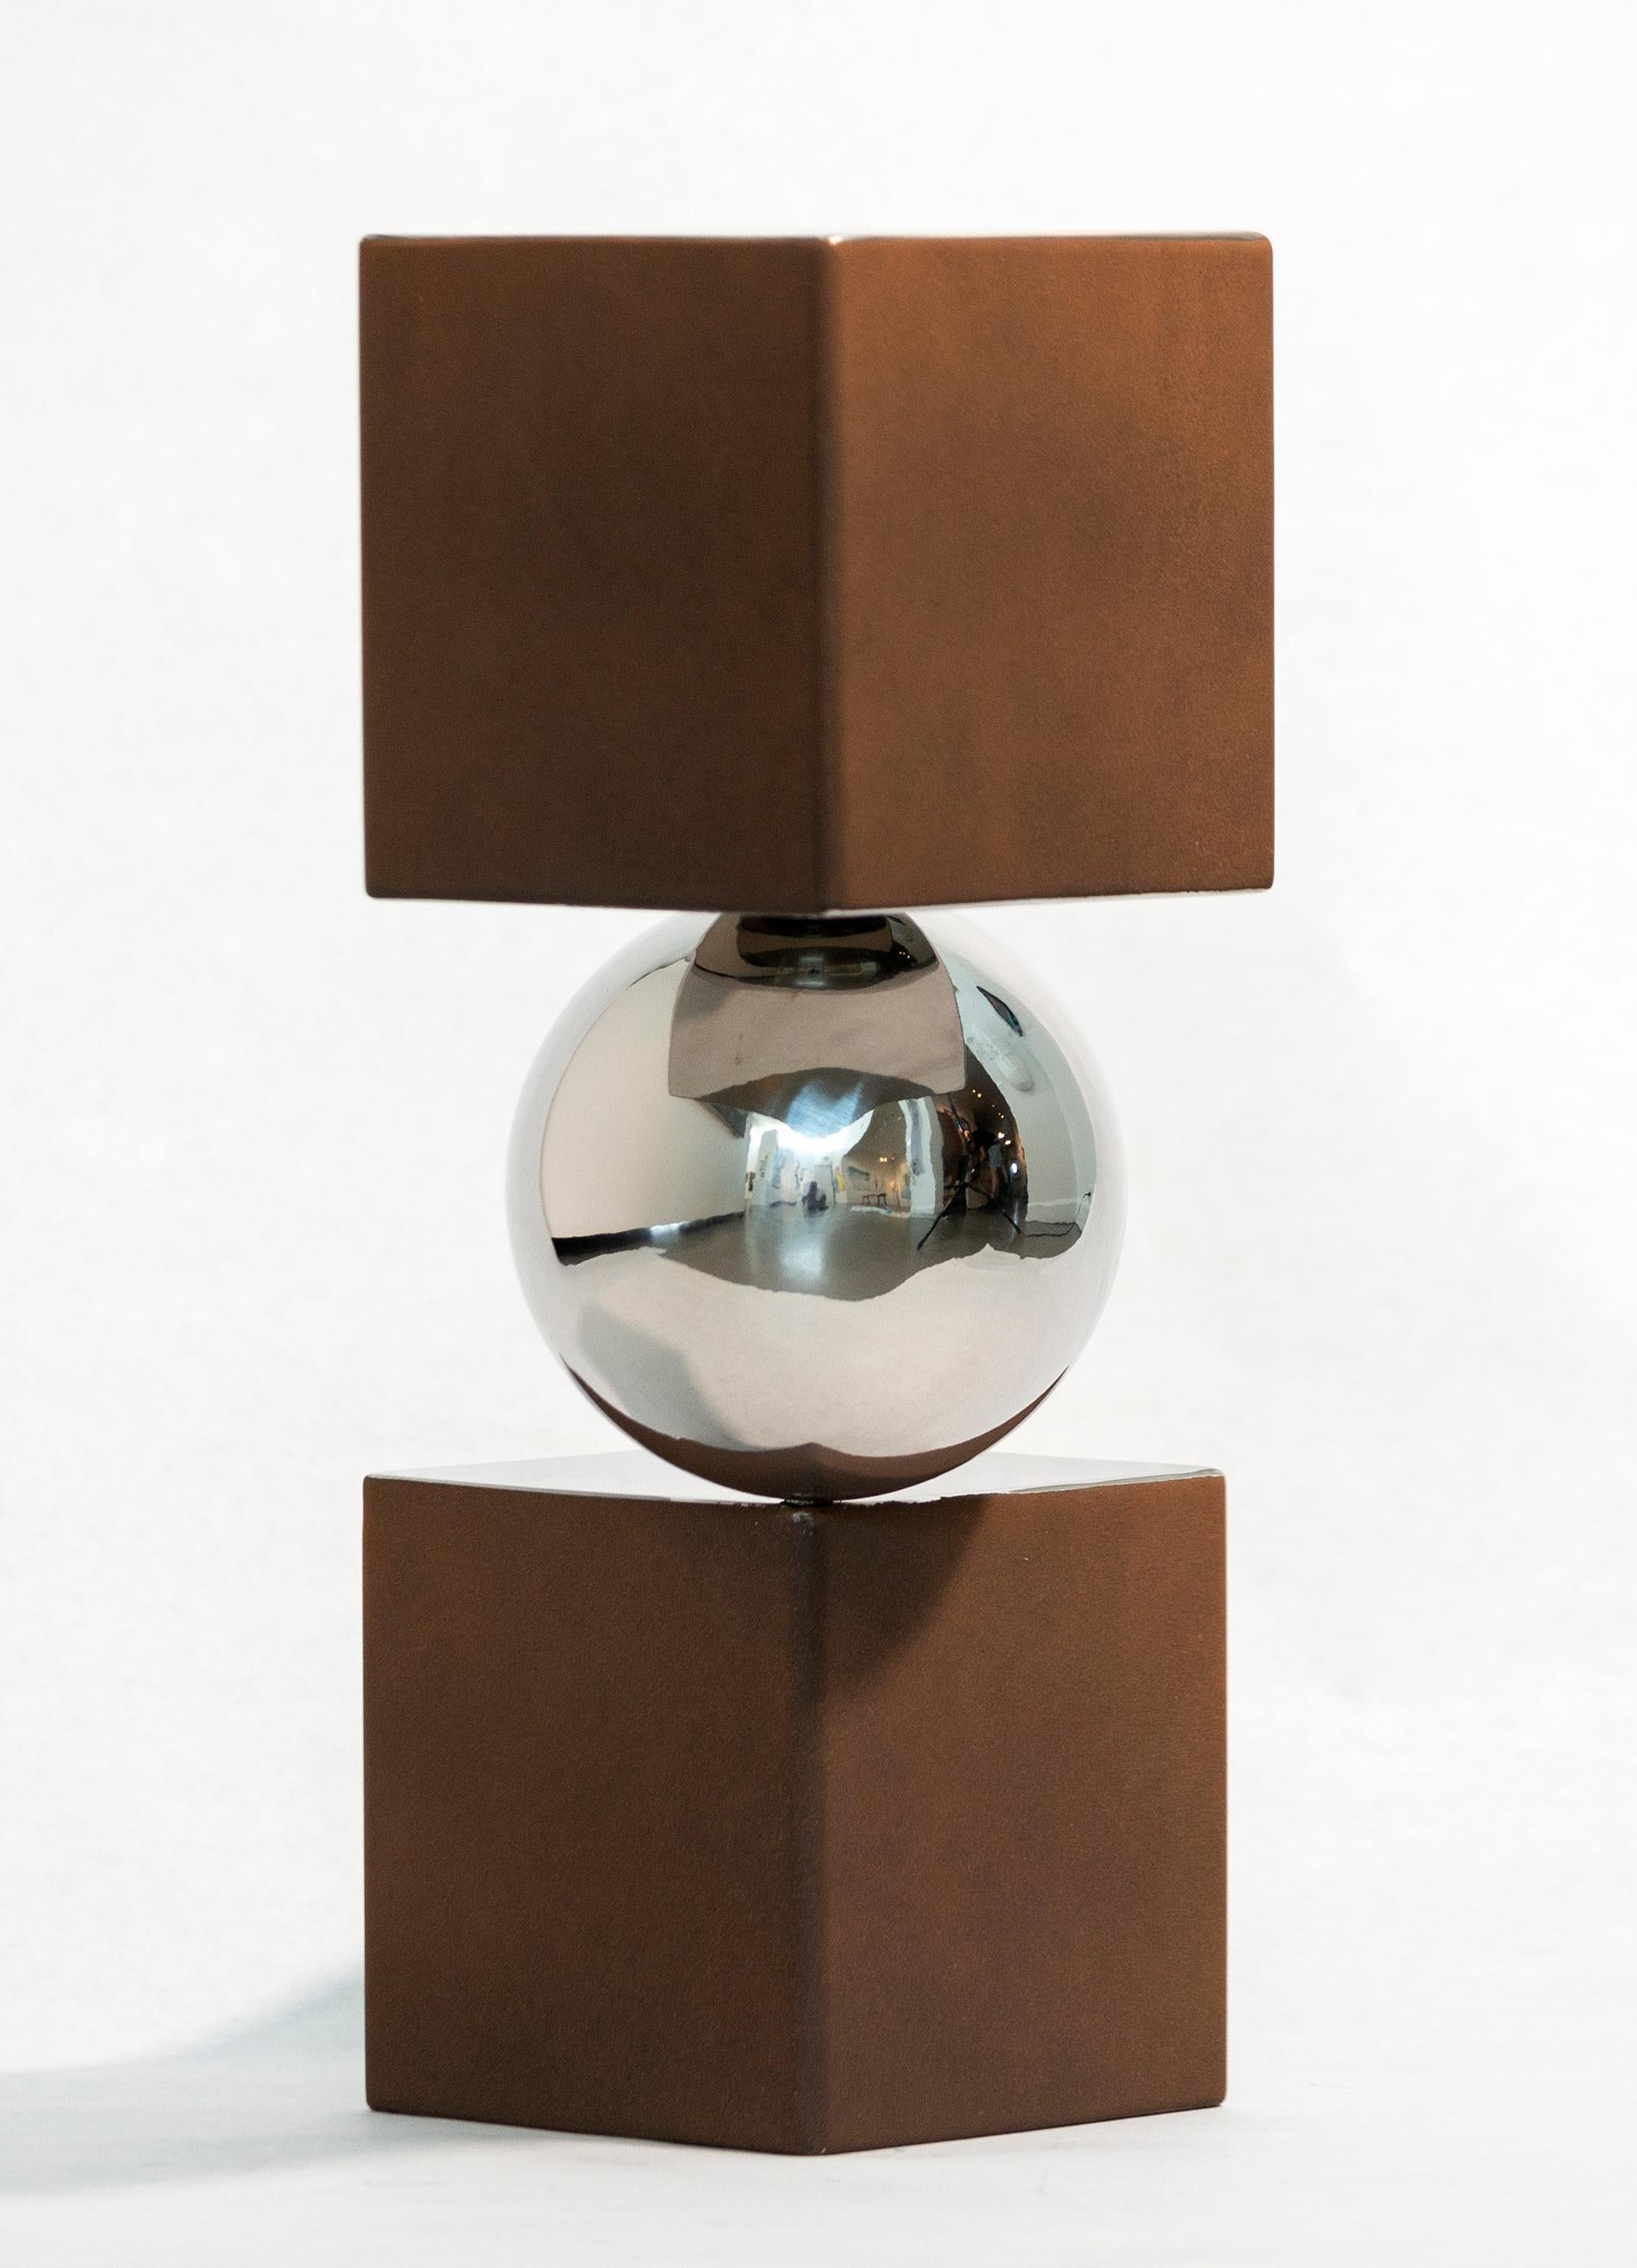 A polished aluminum sphere sits artfully balanced between two rust-coloured and silver cubes in this dynamic modern tabletop sculpture by Philippe Pallafray. ‘Equilibre’ means ‘balance’ in French. The Quebec artist uses industrial metal